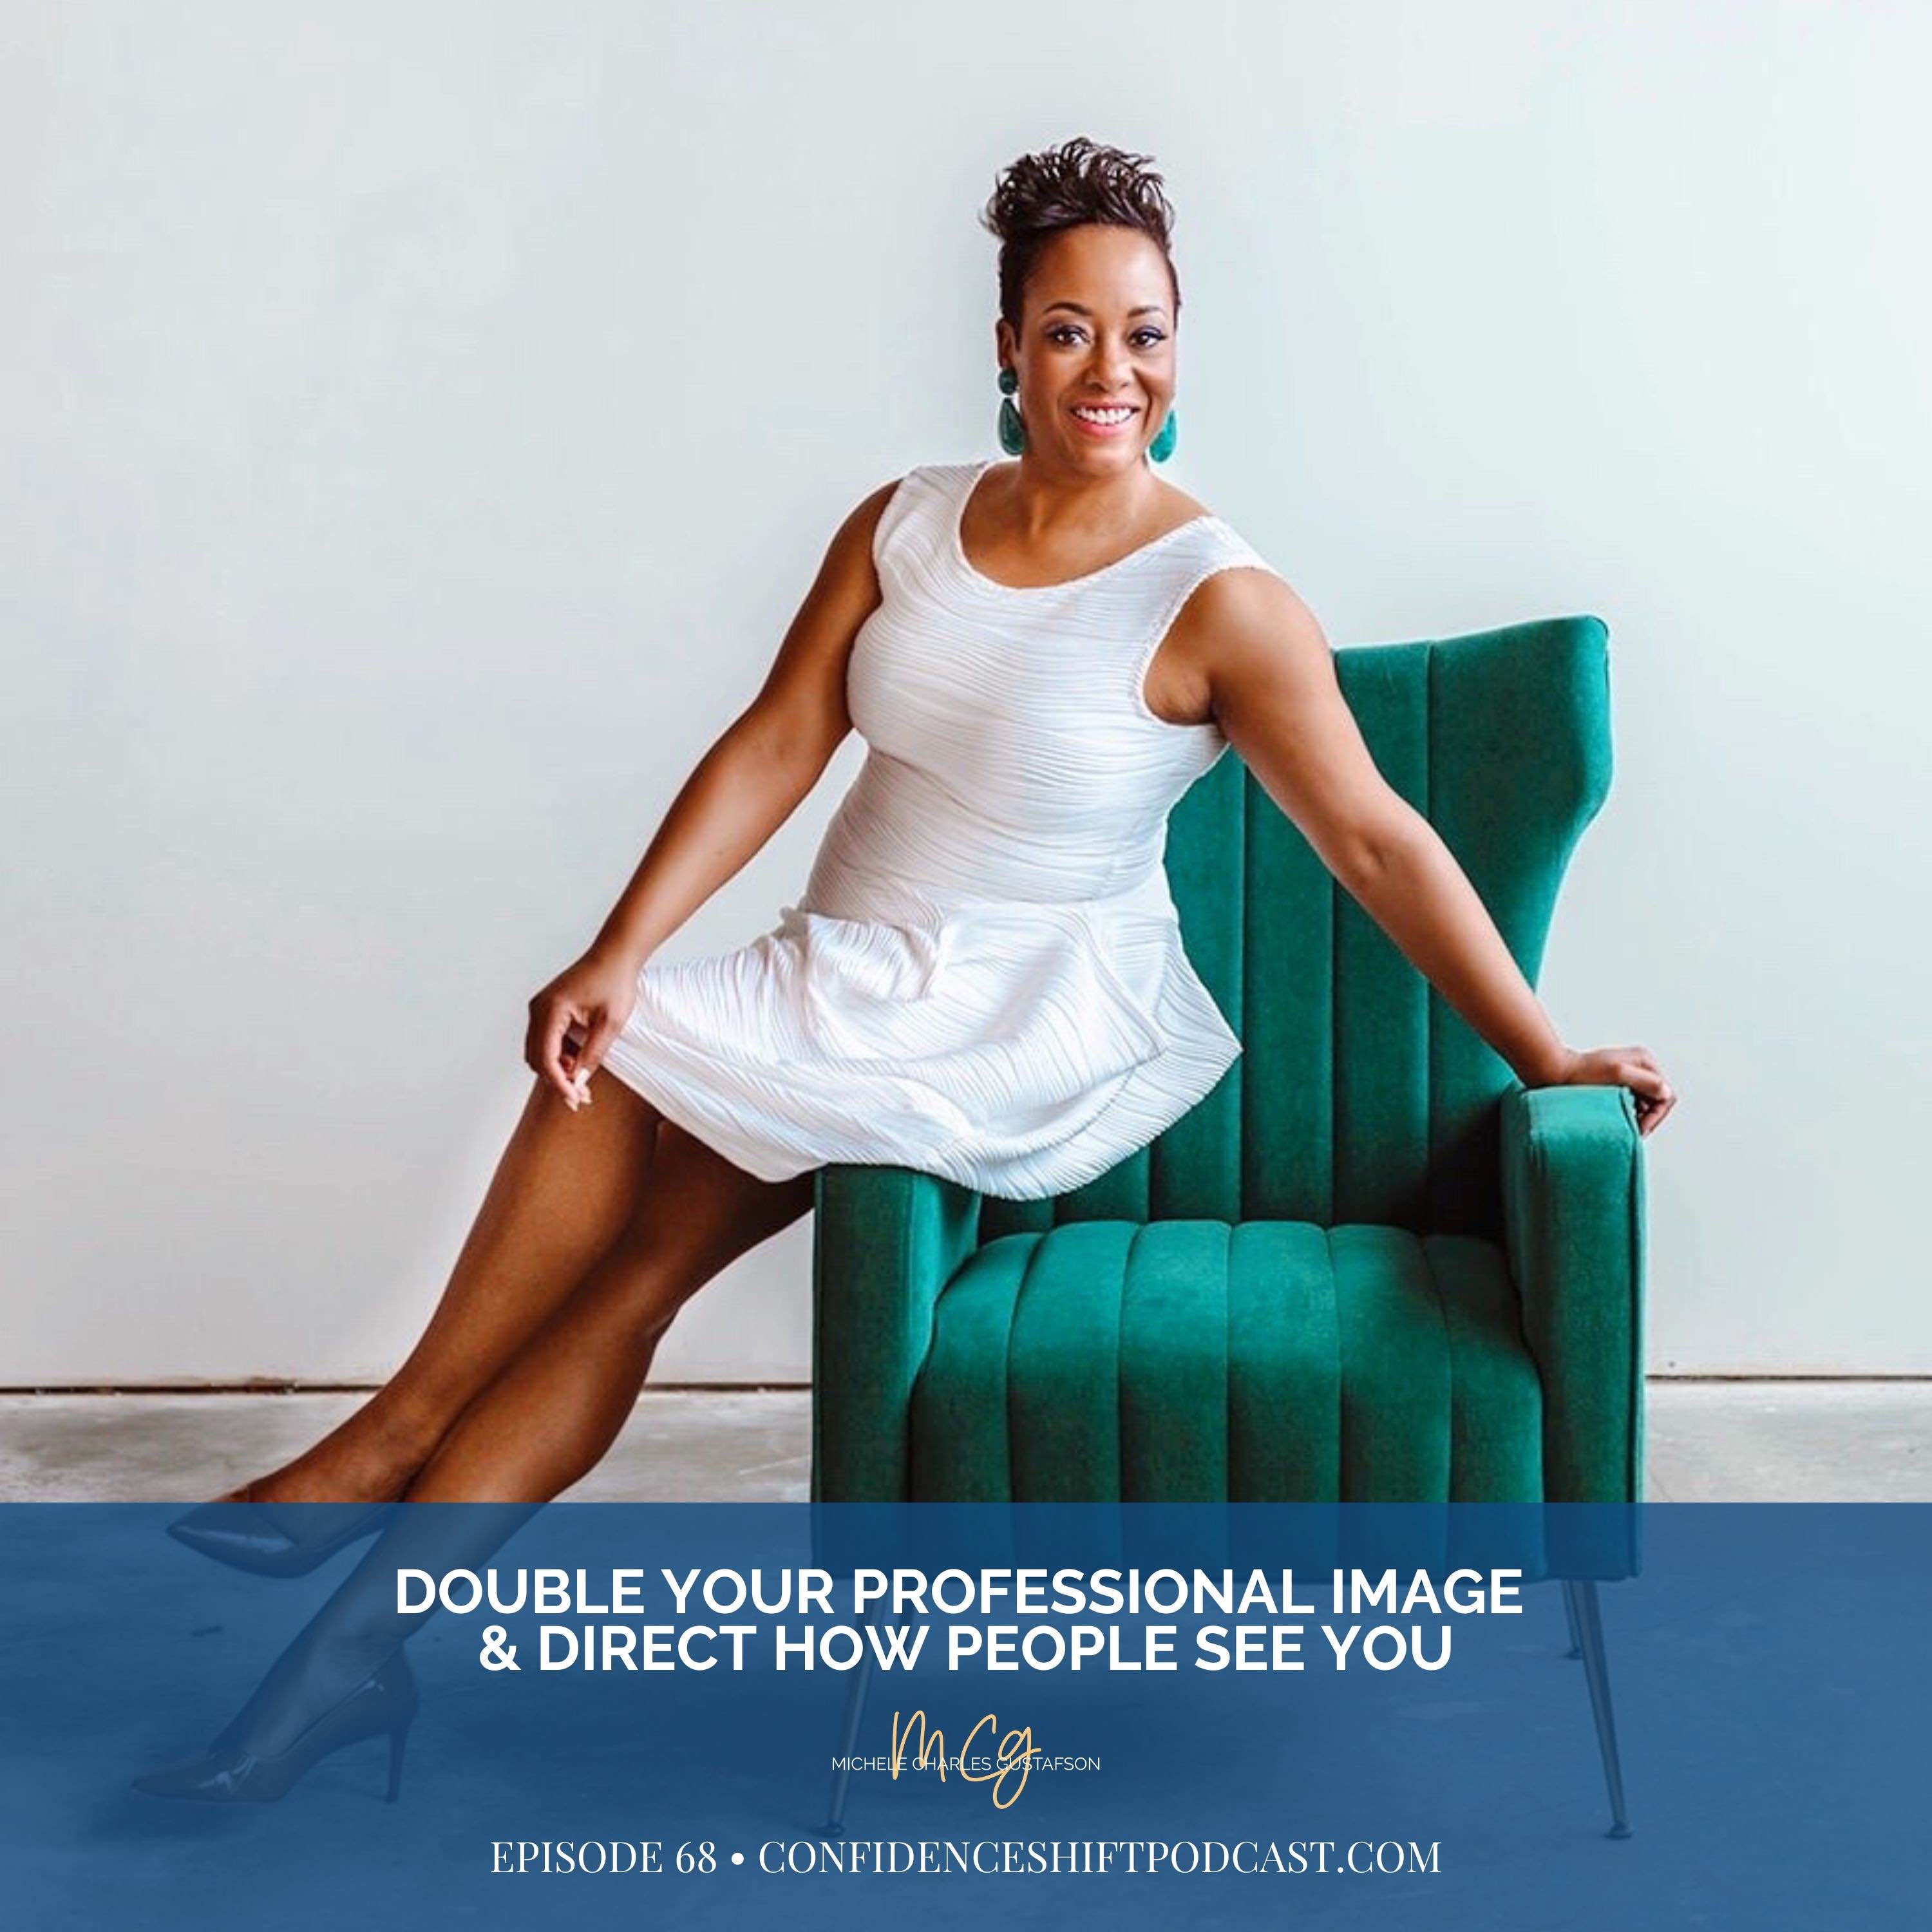 Double Your Professional Image & Direct How People See You